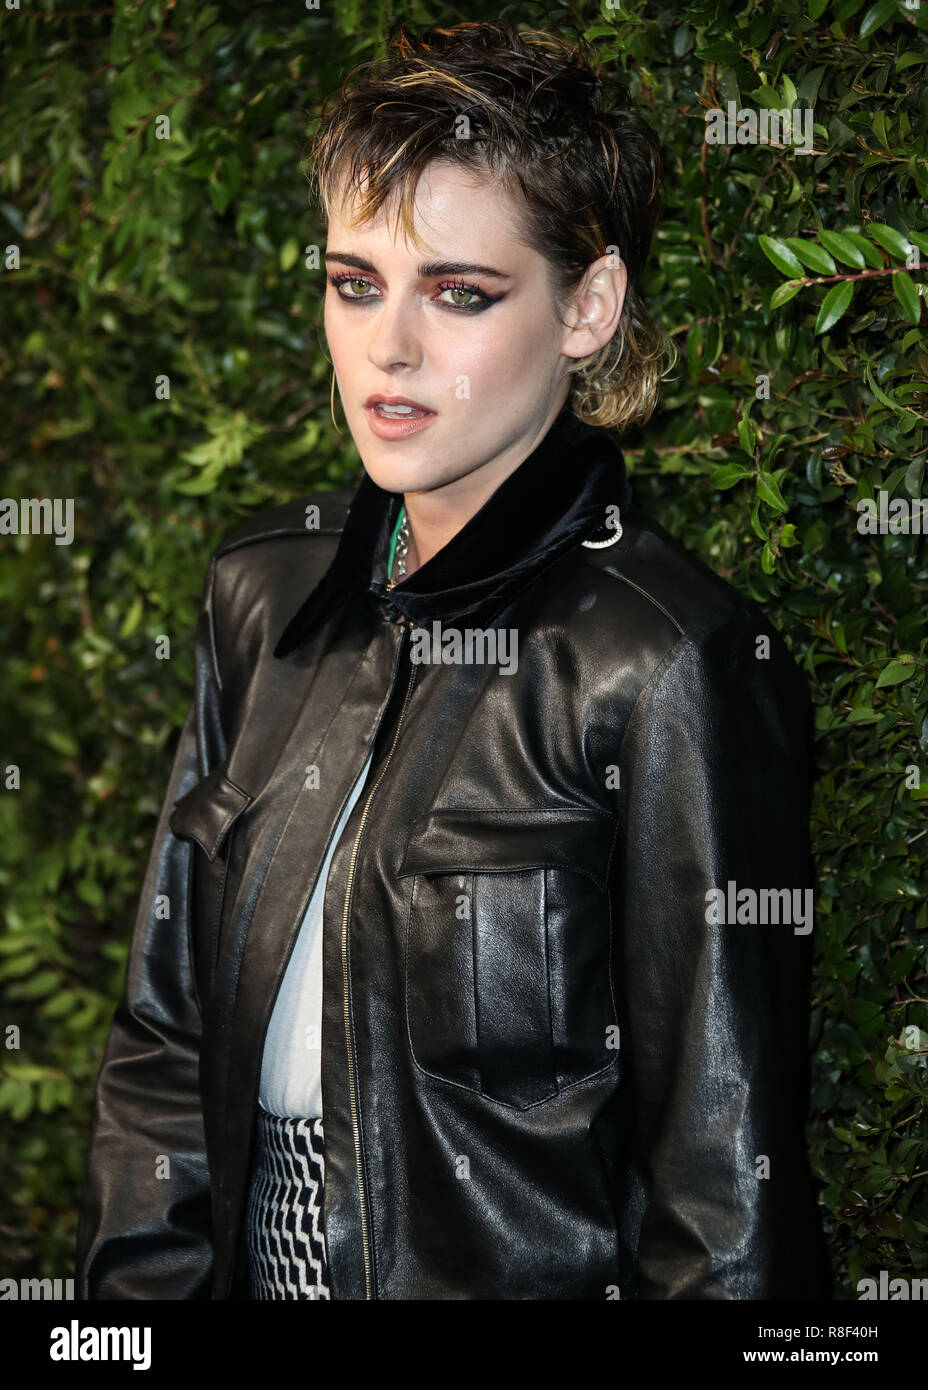 BEVERLY HILLS, LOS ANGELES, CA, USA - MARCH 03: Kristen Stewart at the Chanel And Charles Finch Pre-Oscar Awards Dinner 2018 held at Madeo Restaurant on March 3, 2018 in Beverly Hills, Los Angeles, California, United States. (Photo by Xavier Collin/Image Press Agency) Stock Photo